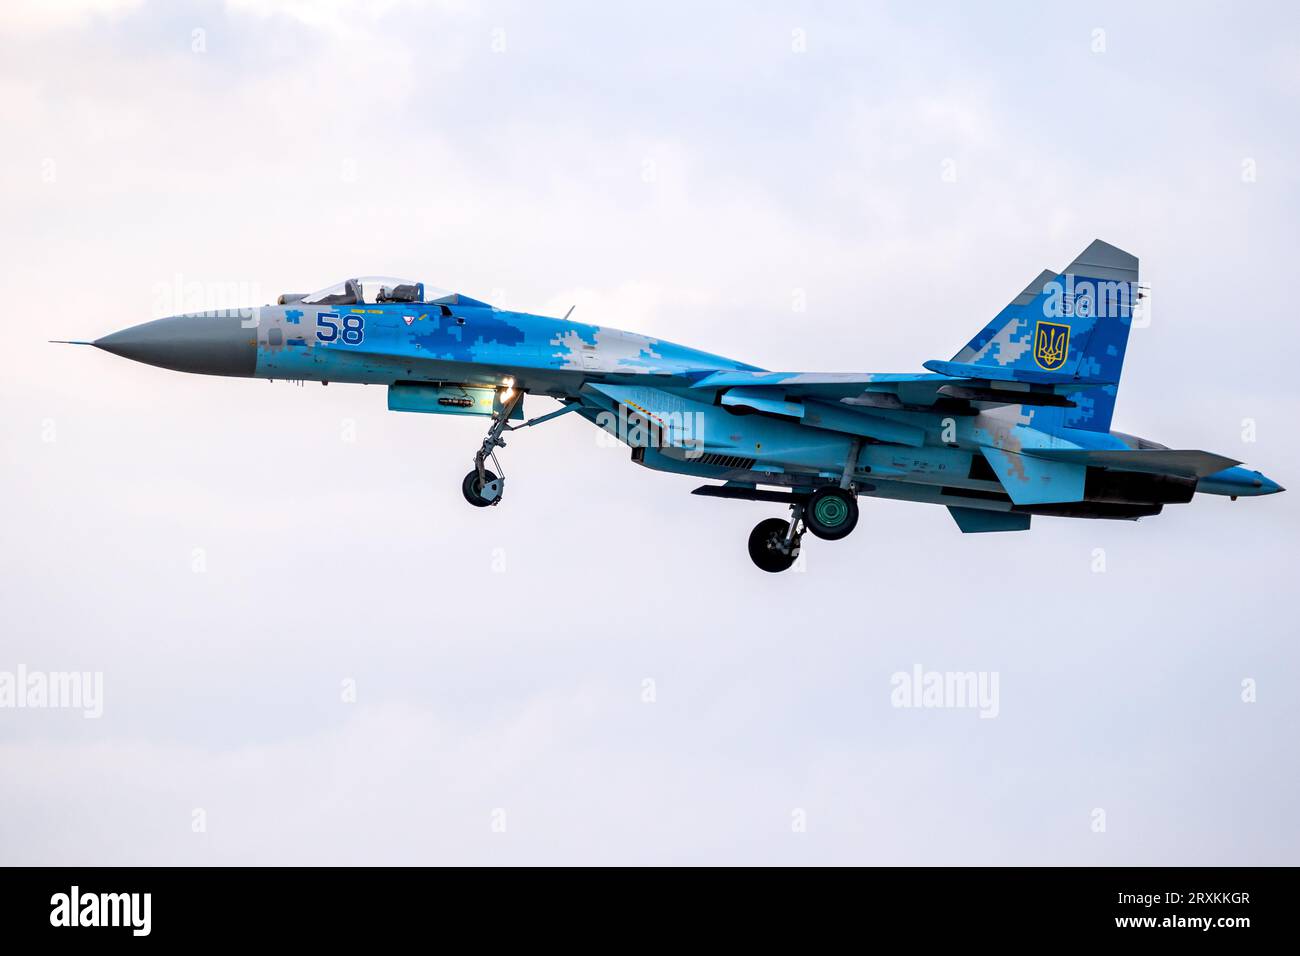 Ukrainian Air Force Sukhoi Su-27 fighter jet plane take off from RAF Fairford airbase. UK - July 13, 2018 Stock Photo